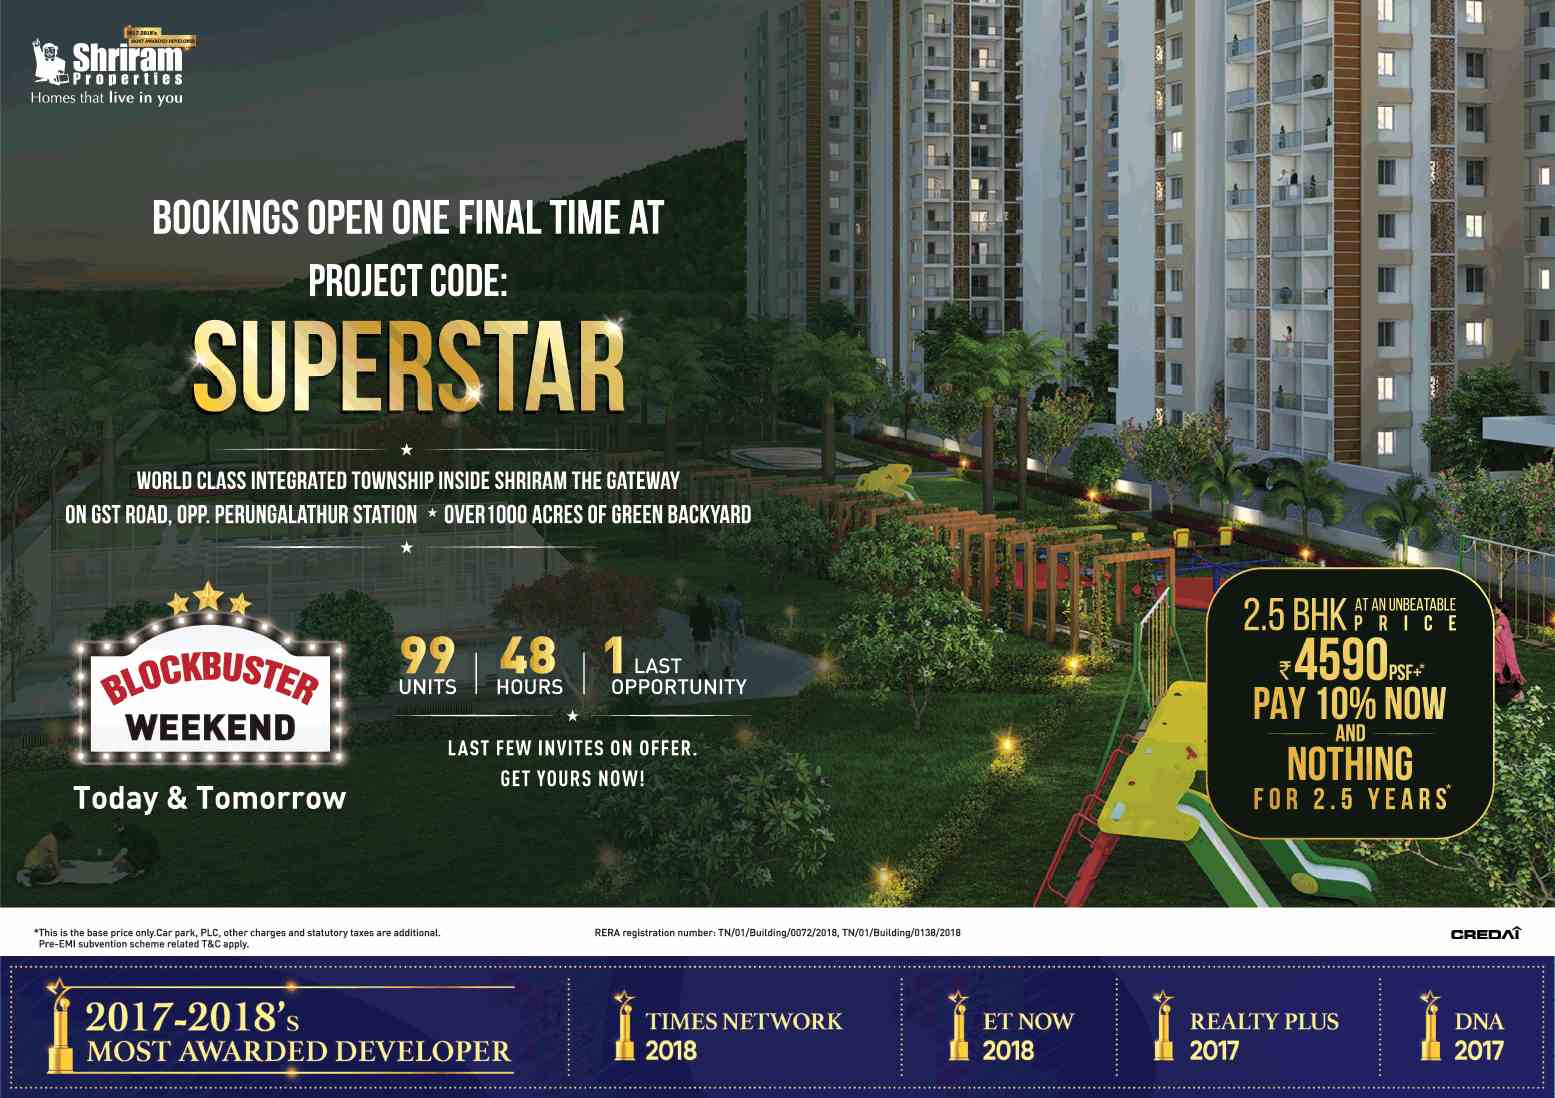 Pay 10% now and nothing for 2.5 years at Shriram Code Superstar in Chennai Update